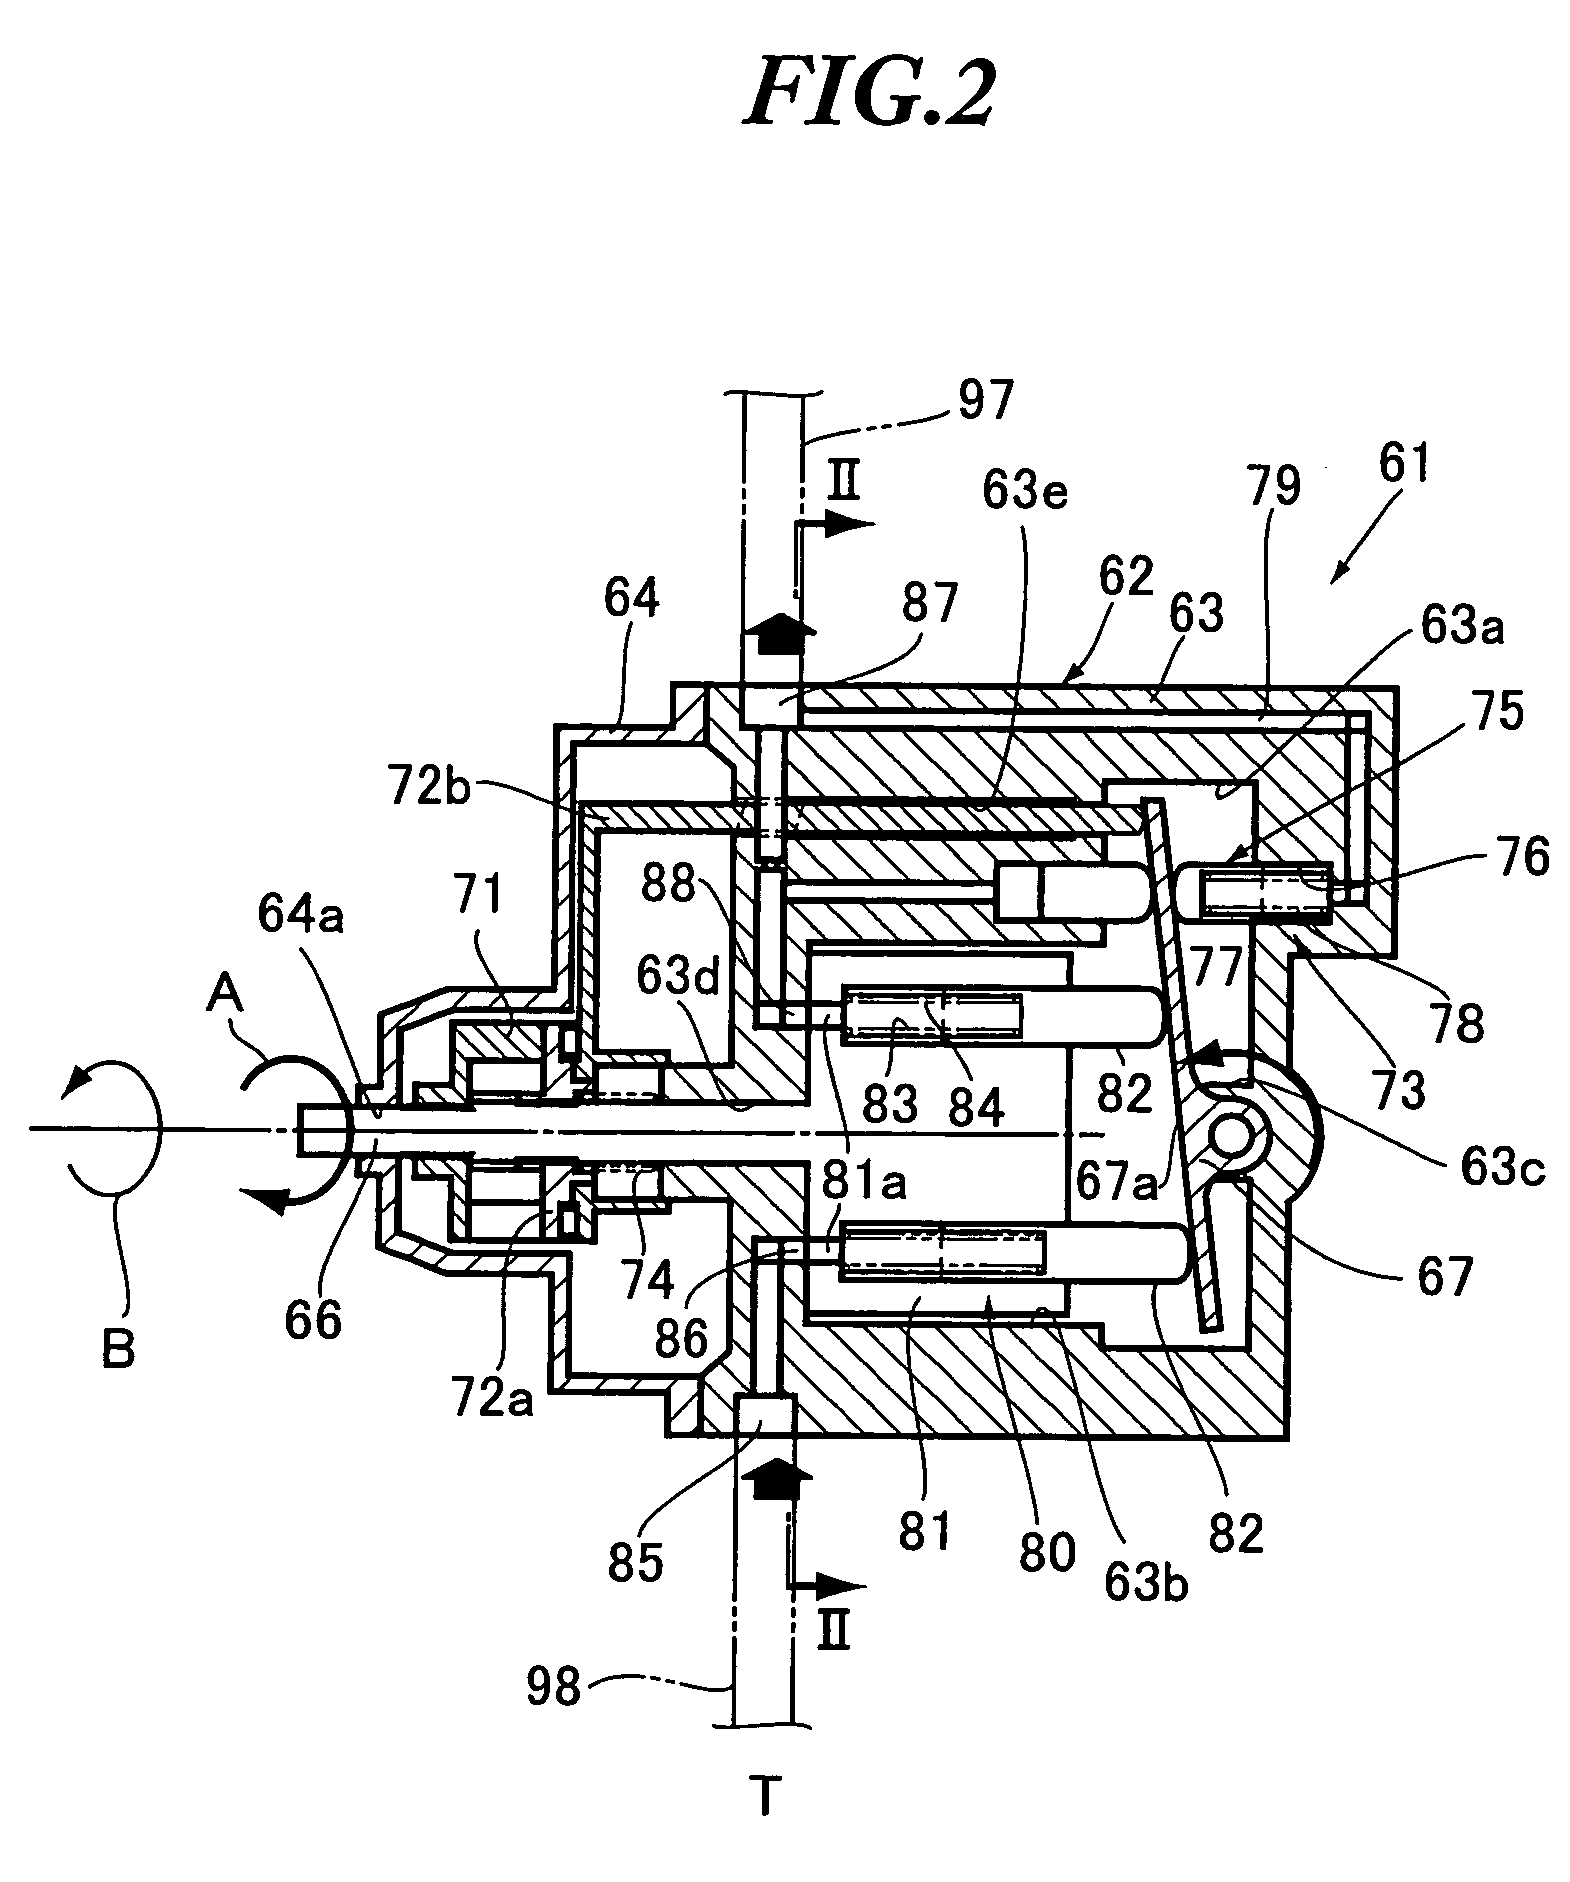 Driving force distribution apparatus for right and left wheels